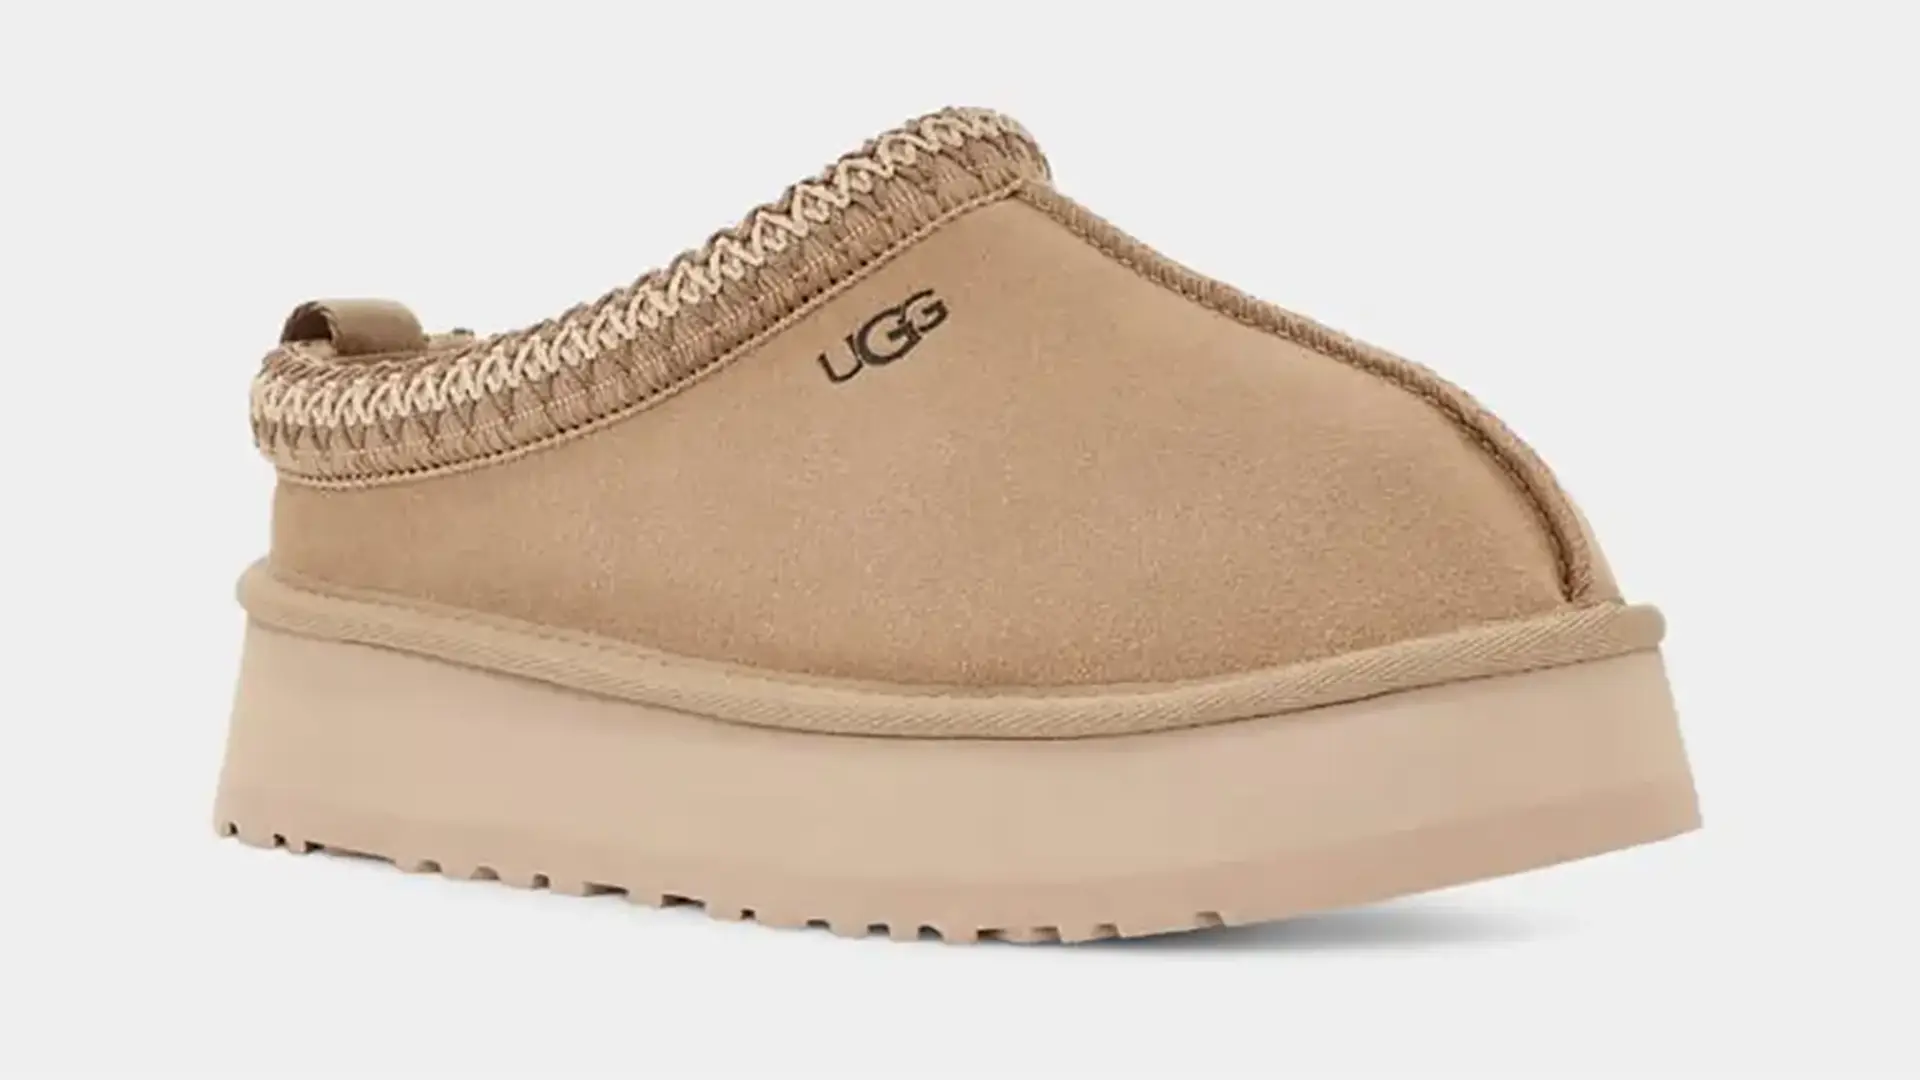 The Ultimate UGG Size Guide: Does UGG Footwear Run True to Size?